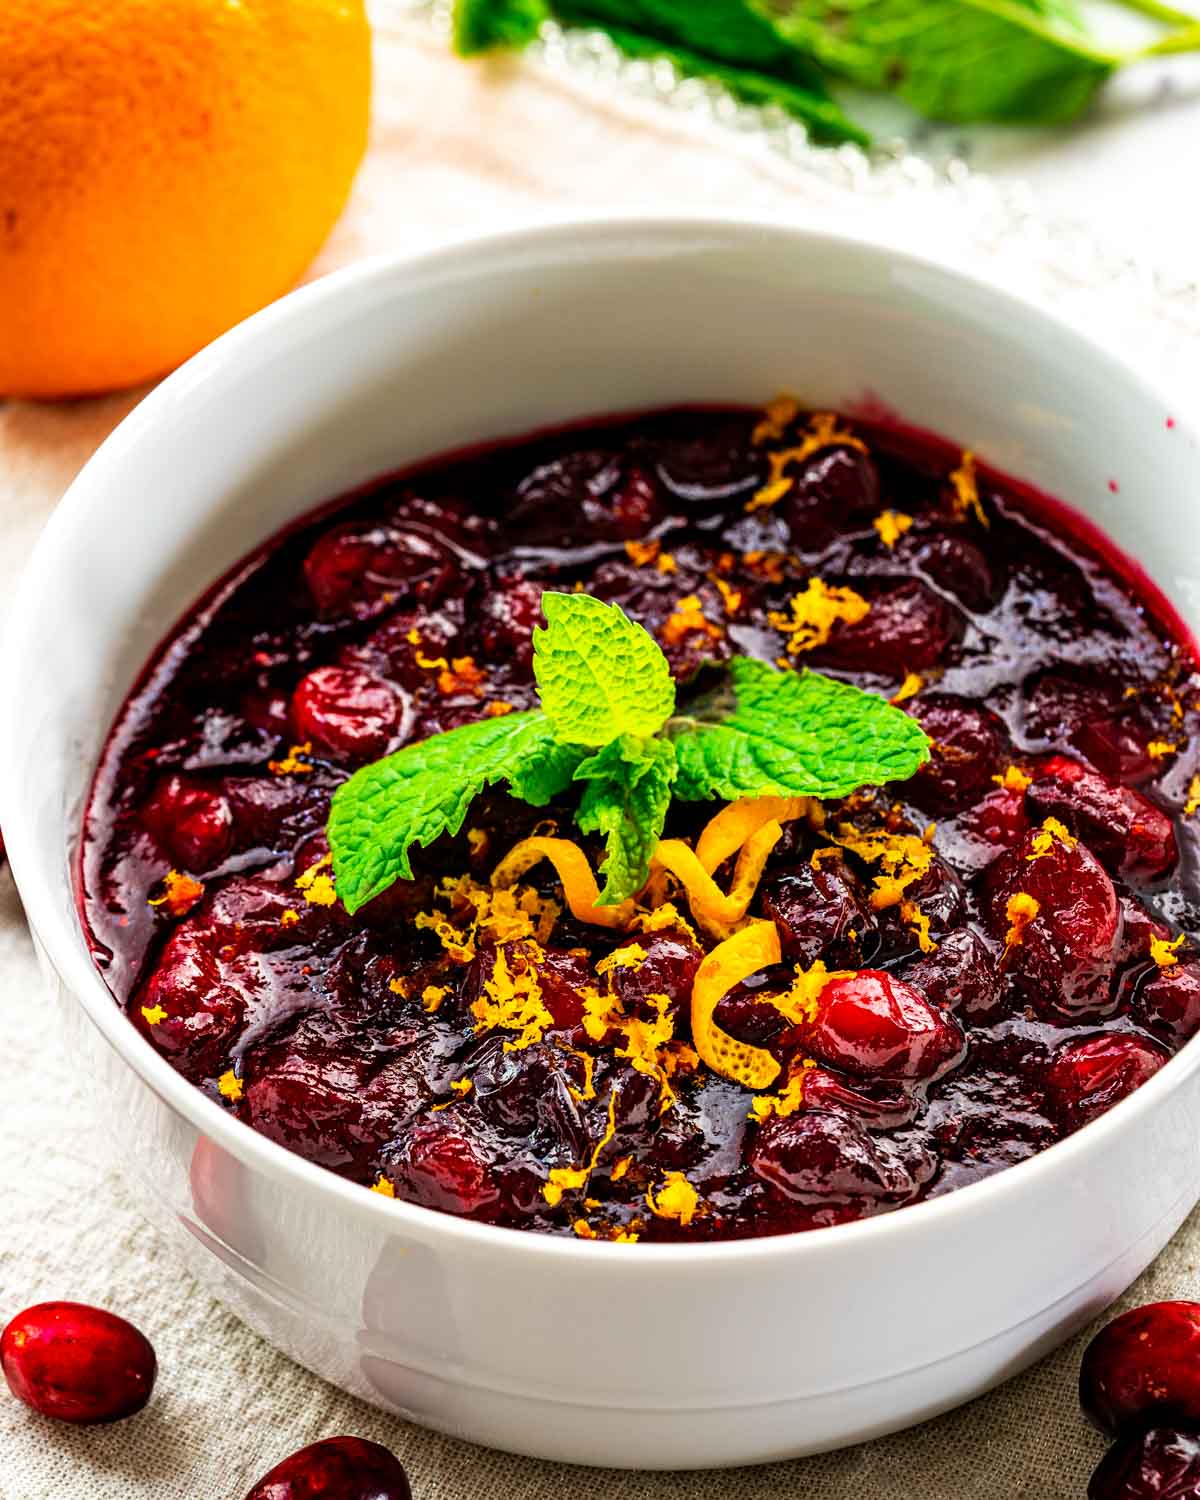 cranberry sauce in a white bowl with orange zest and a piece of mint.